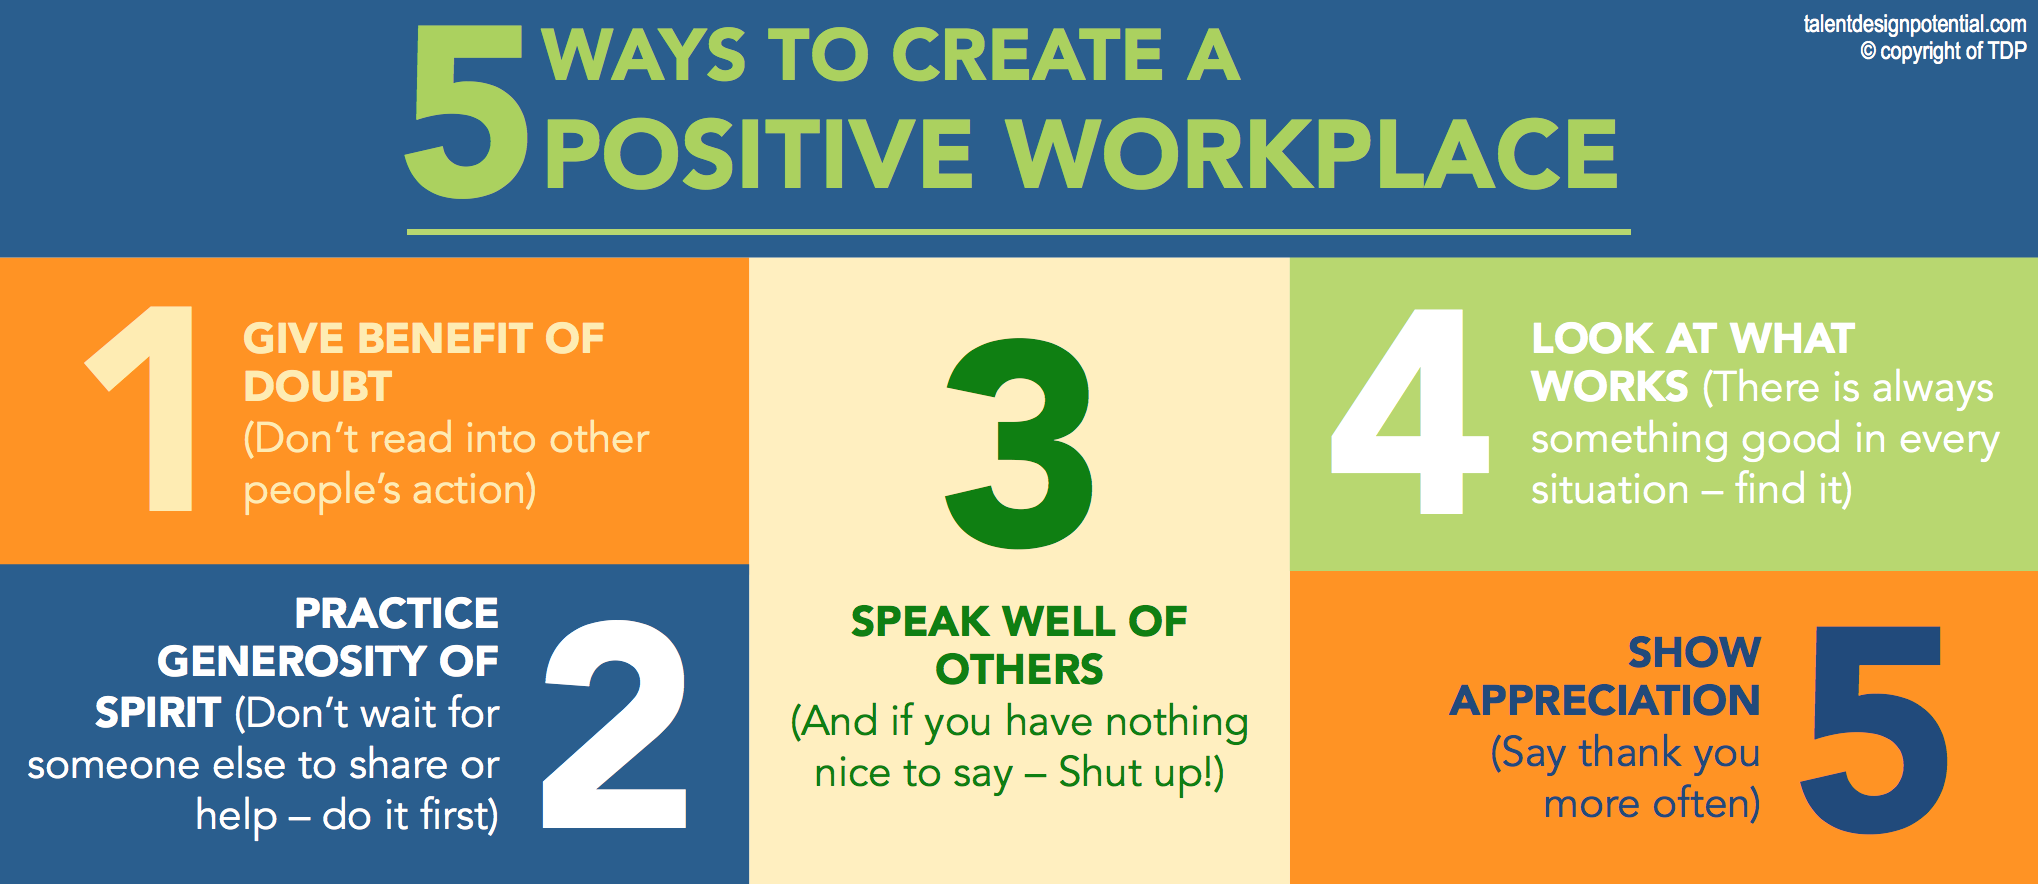 360920630 5 Ways to create a positive workplace